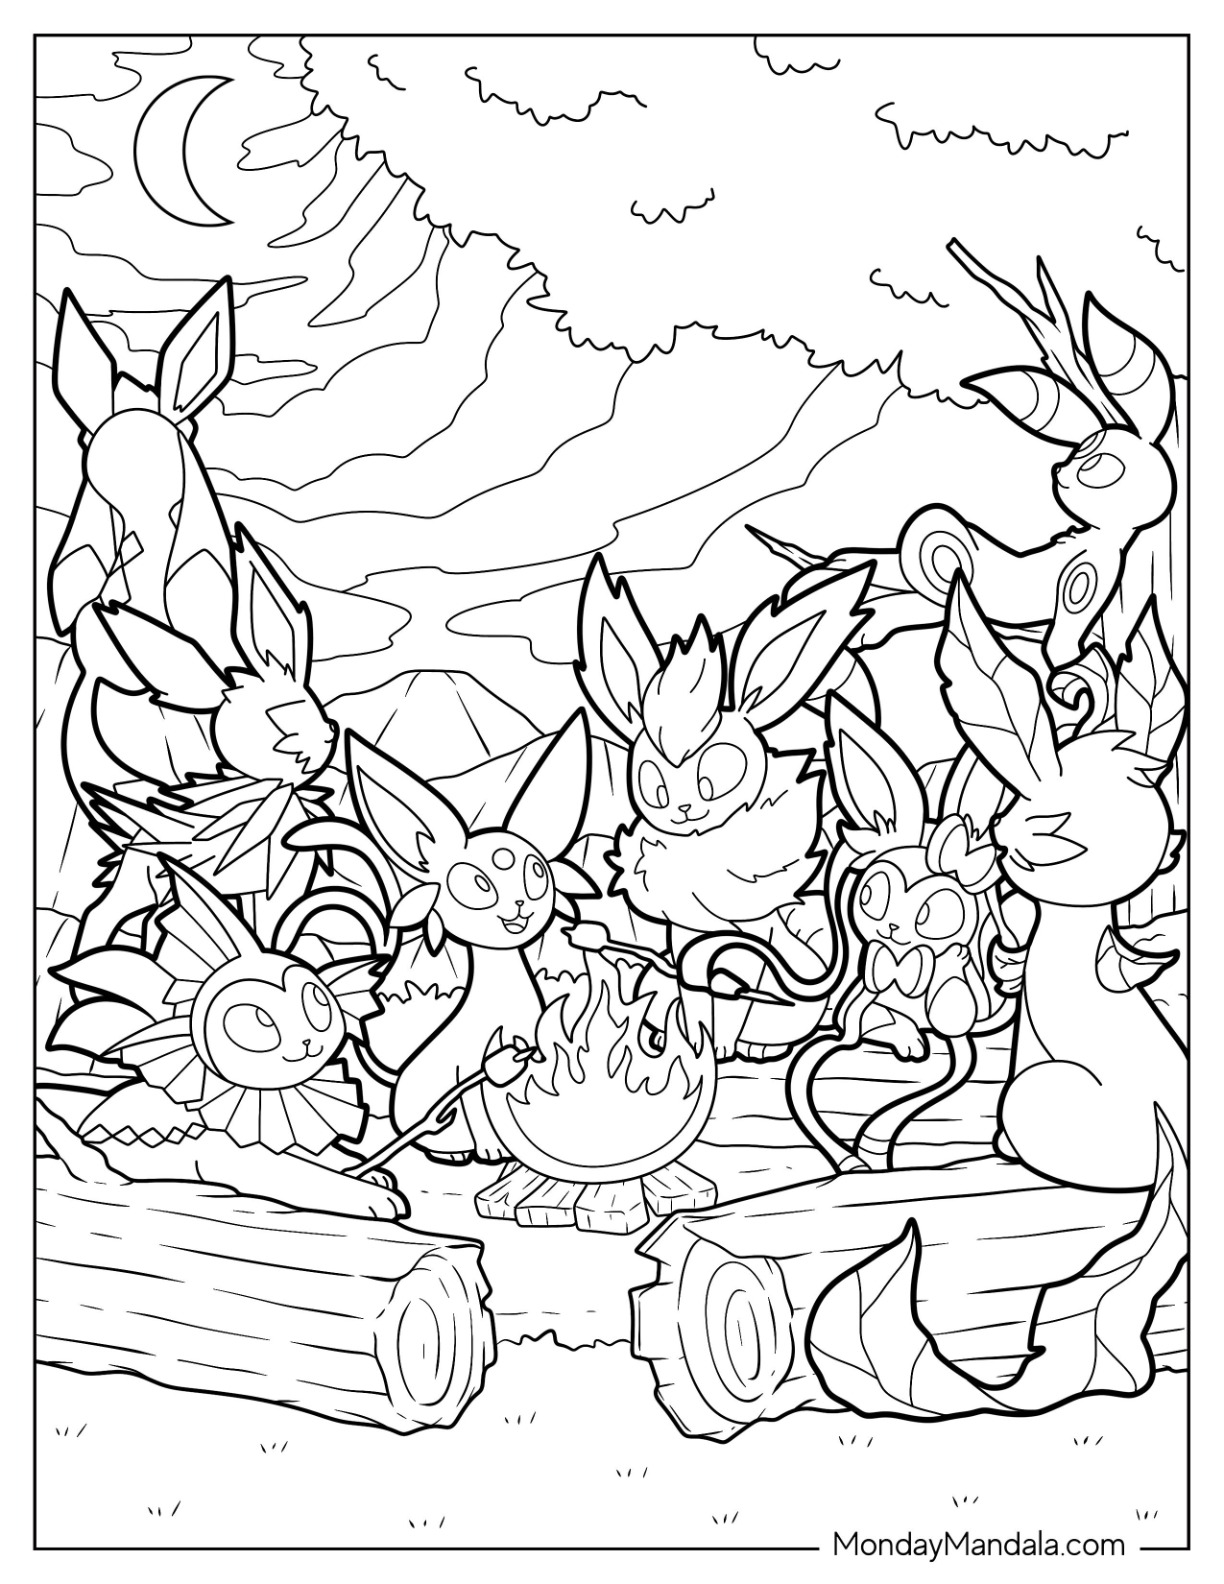 Sylveon coloring pages free pdf printables